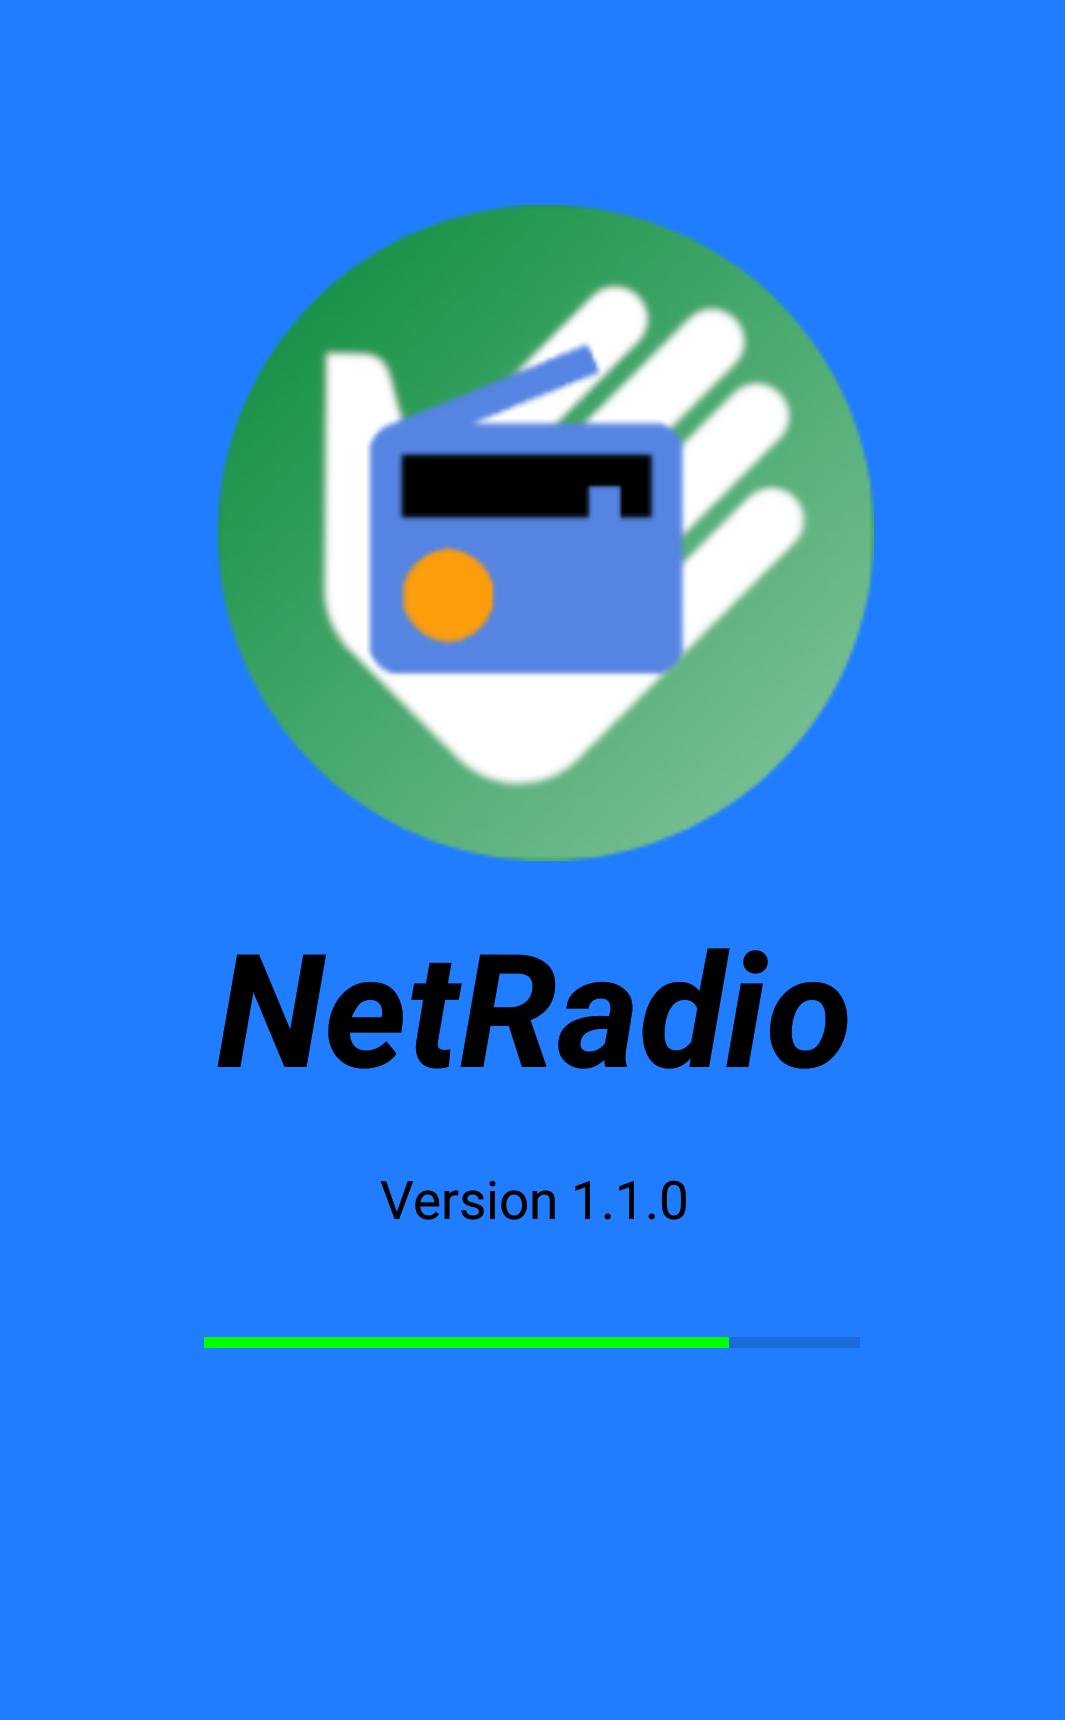 Online FM Radio - NetRadio for Android - APK Download